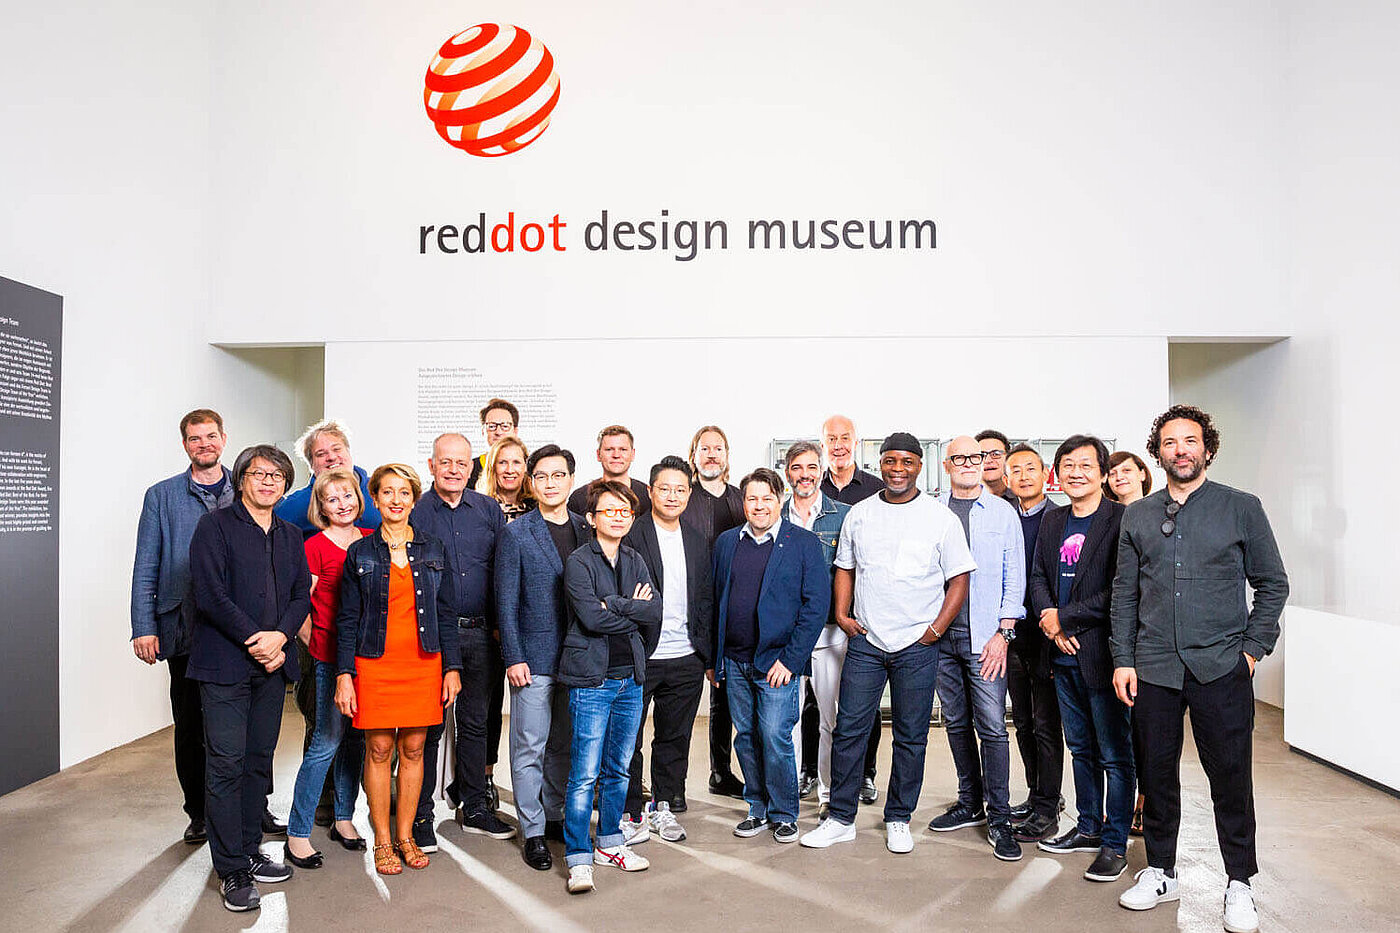 The jury of the Red Dot Award: Brands & Communication Design 2019